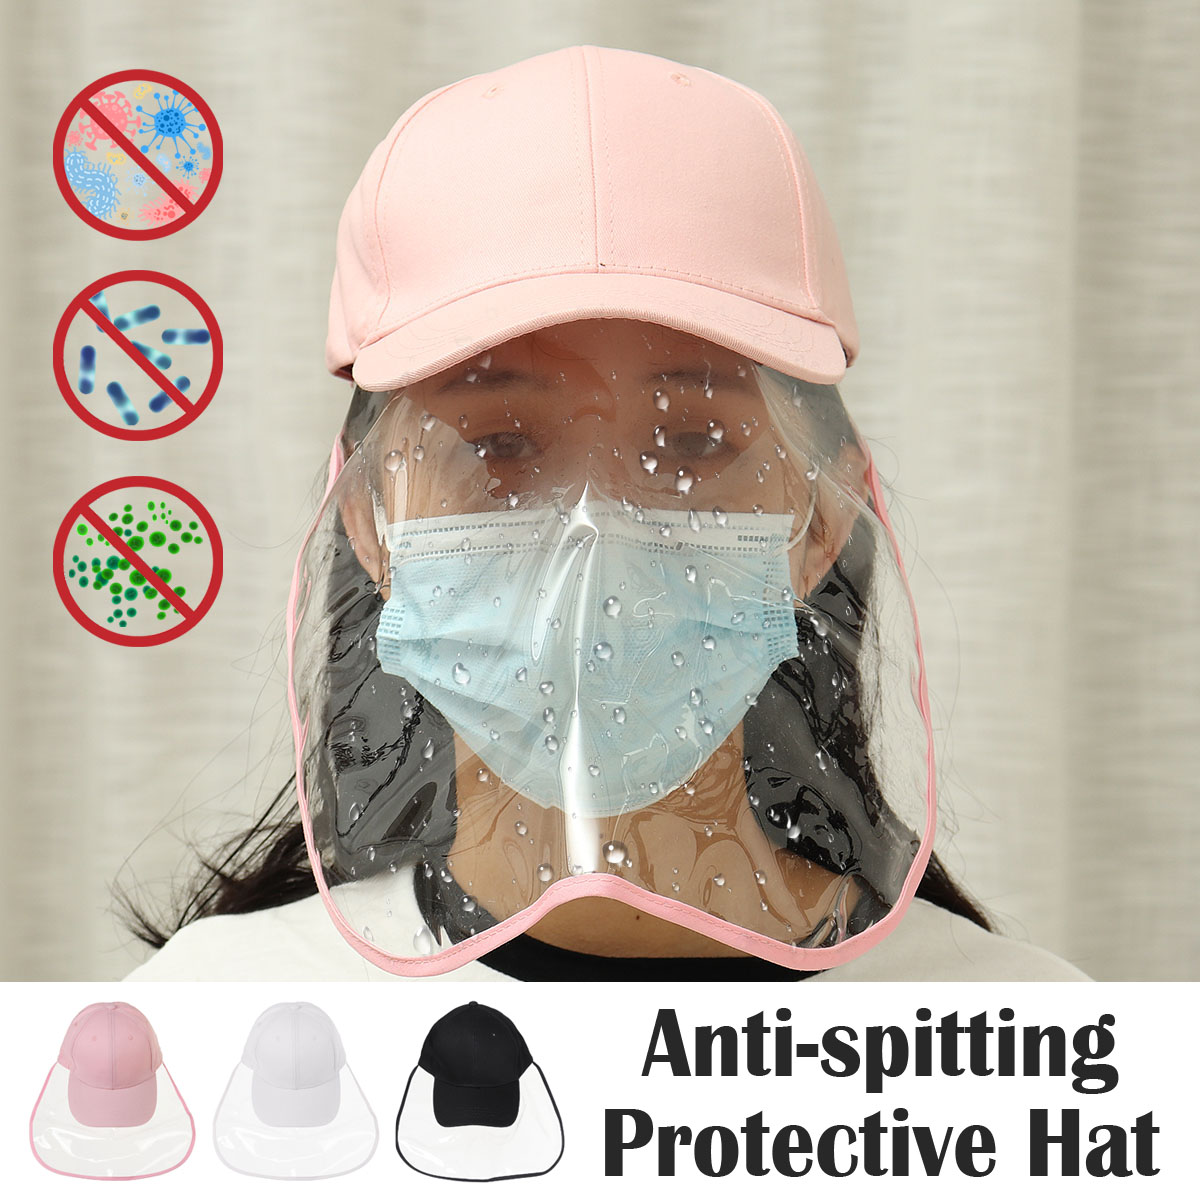 Clear-Full-Face-Hat-Waterproof-Cover-Mask-Cap-Shield-Protective-Anti-spitting-1659895-1